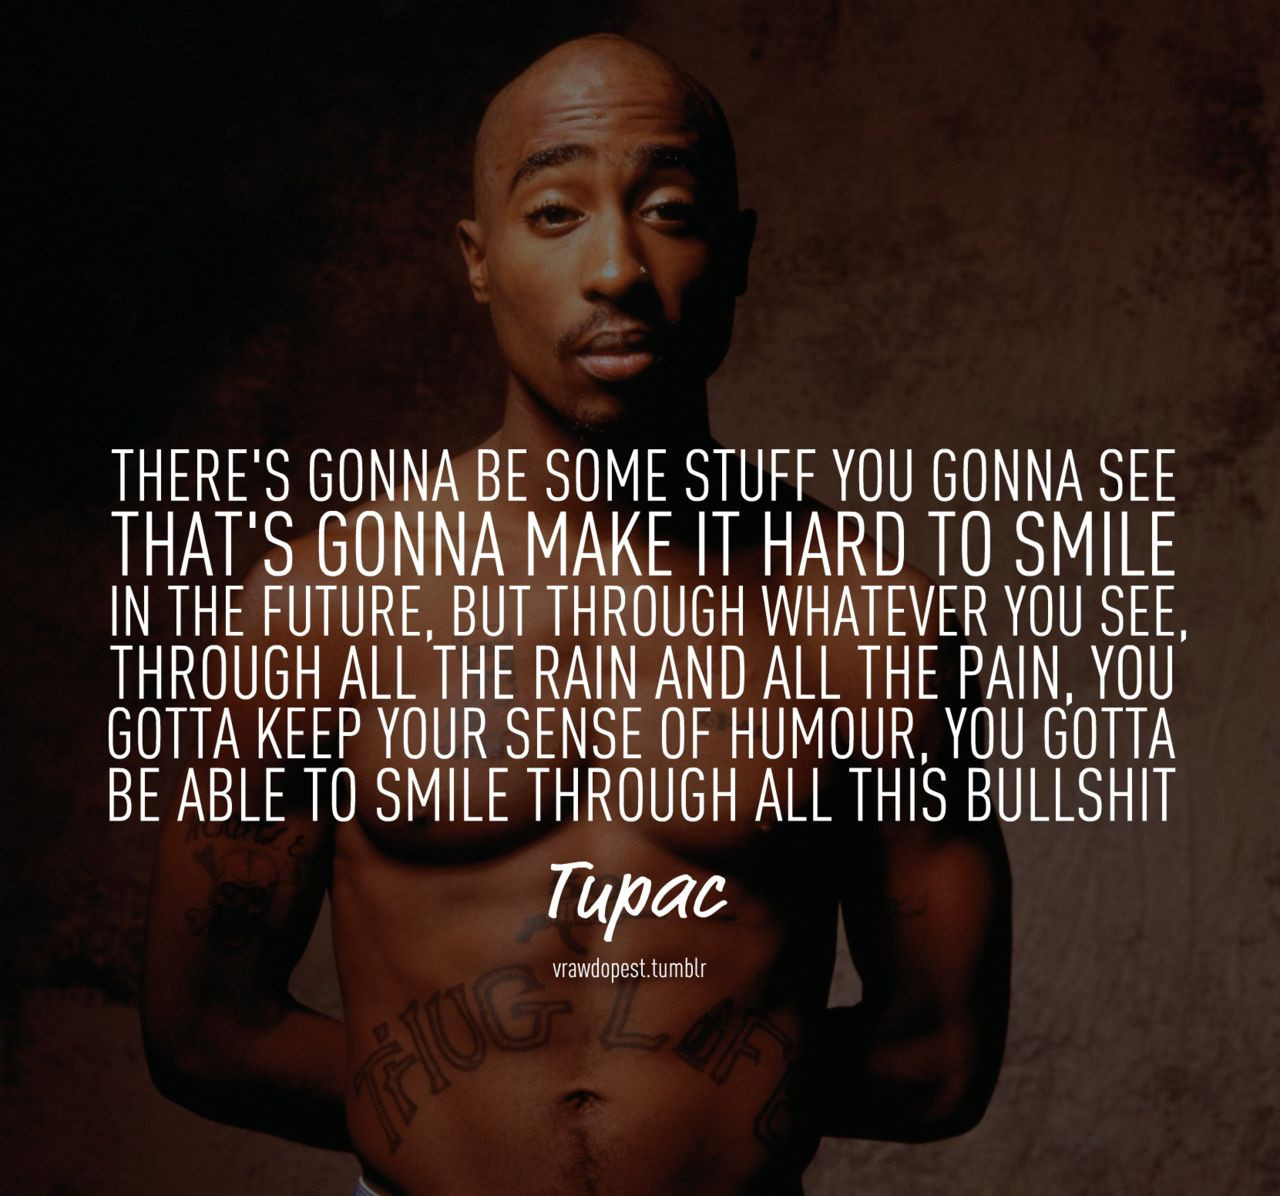 Tupac Inspirational Quote
 inspirational tupac quotes about life Tupac inspiration